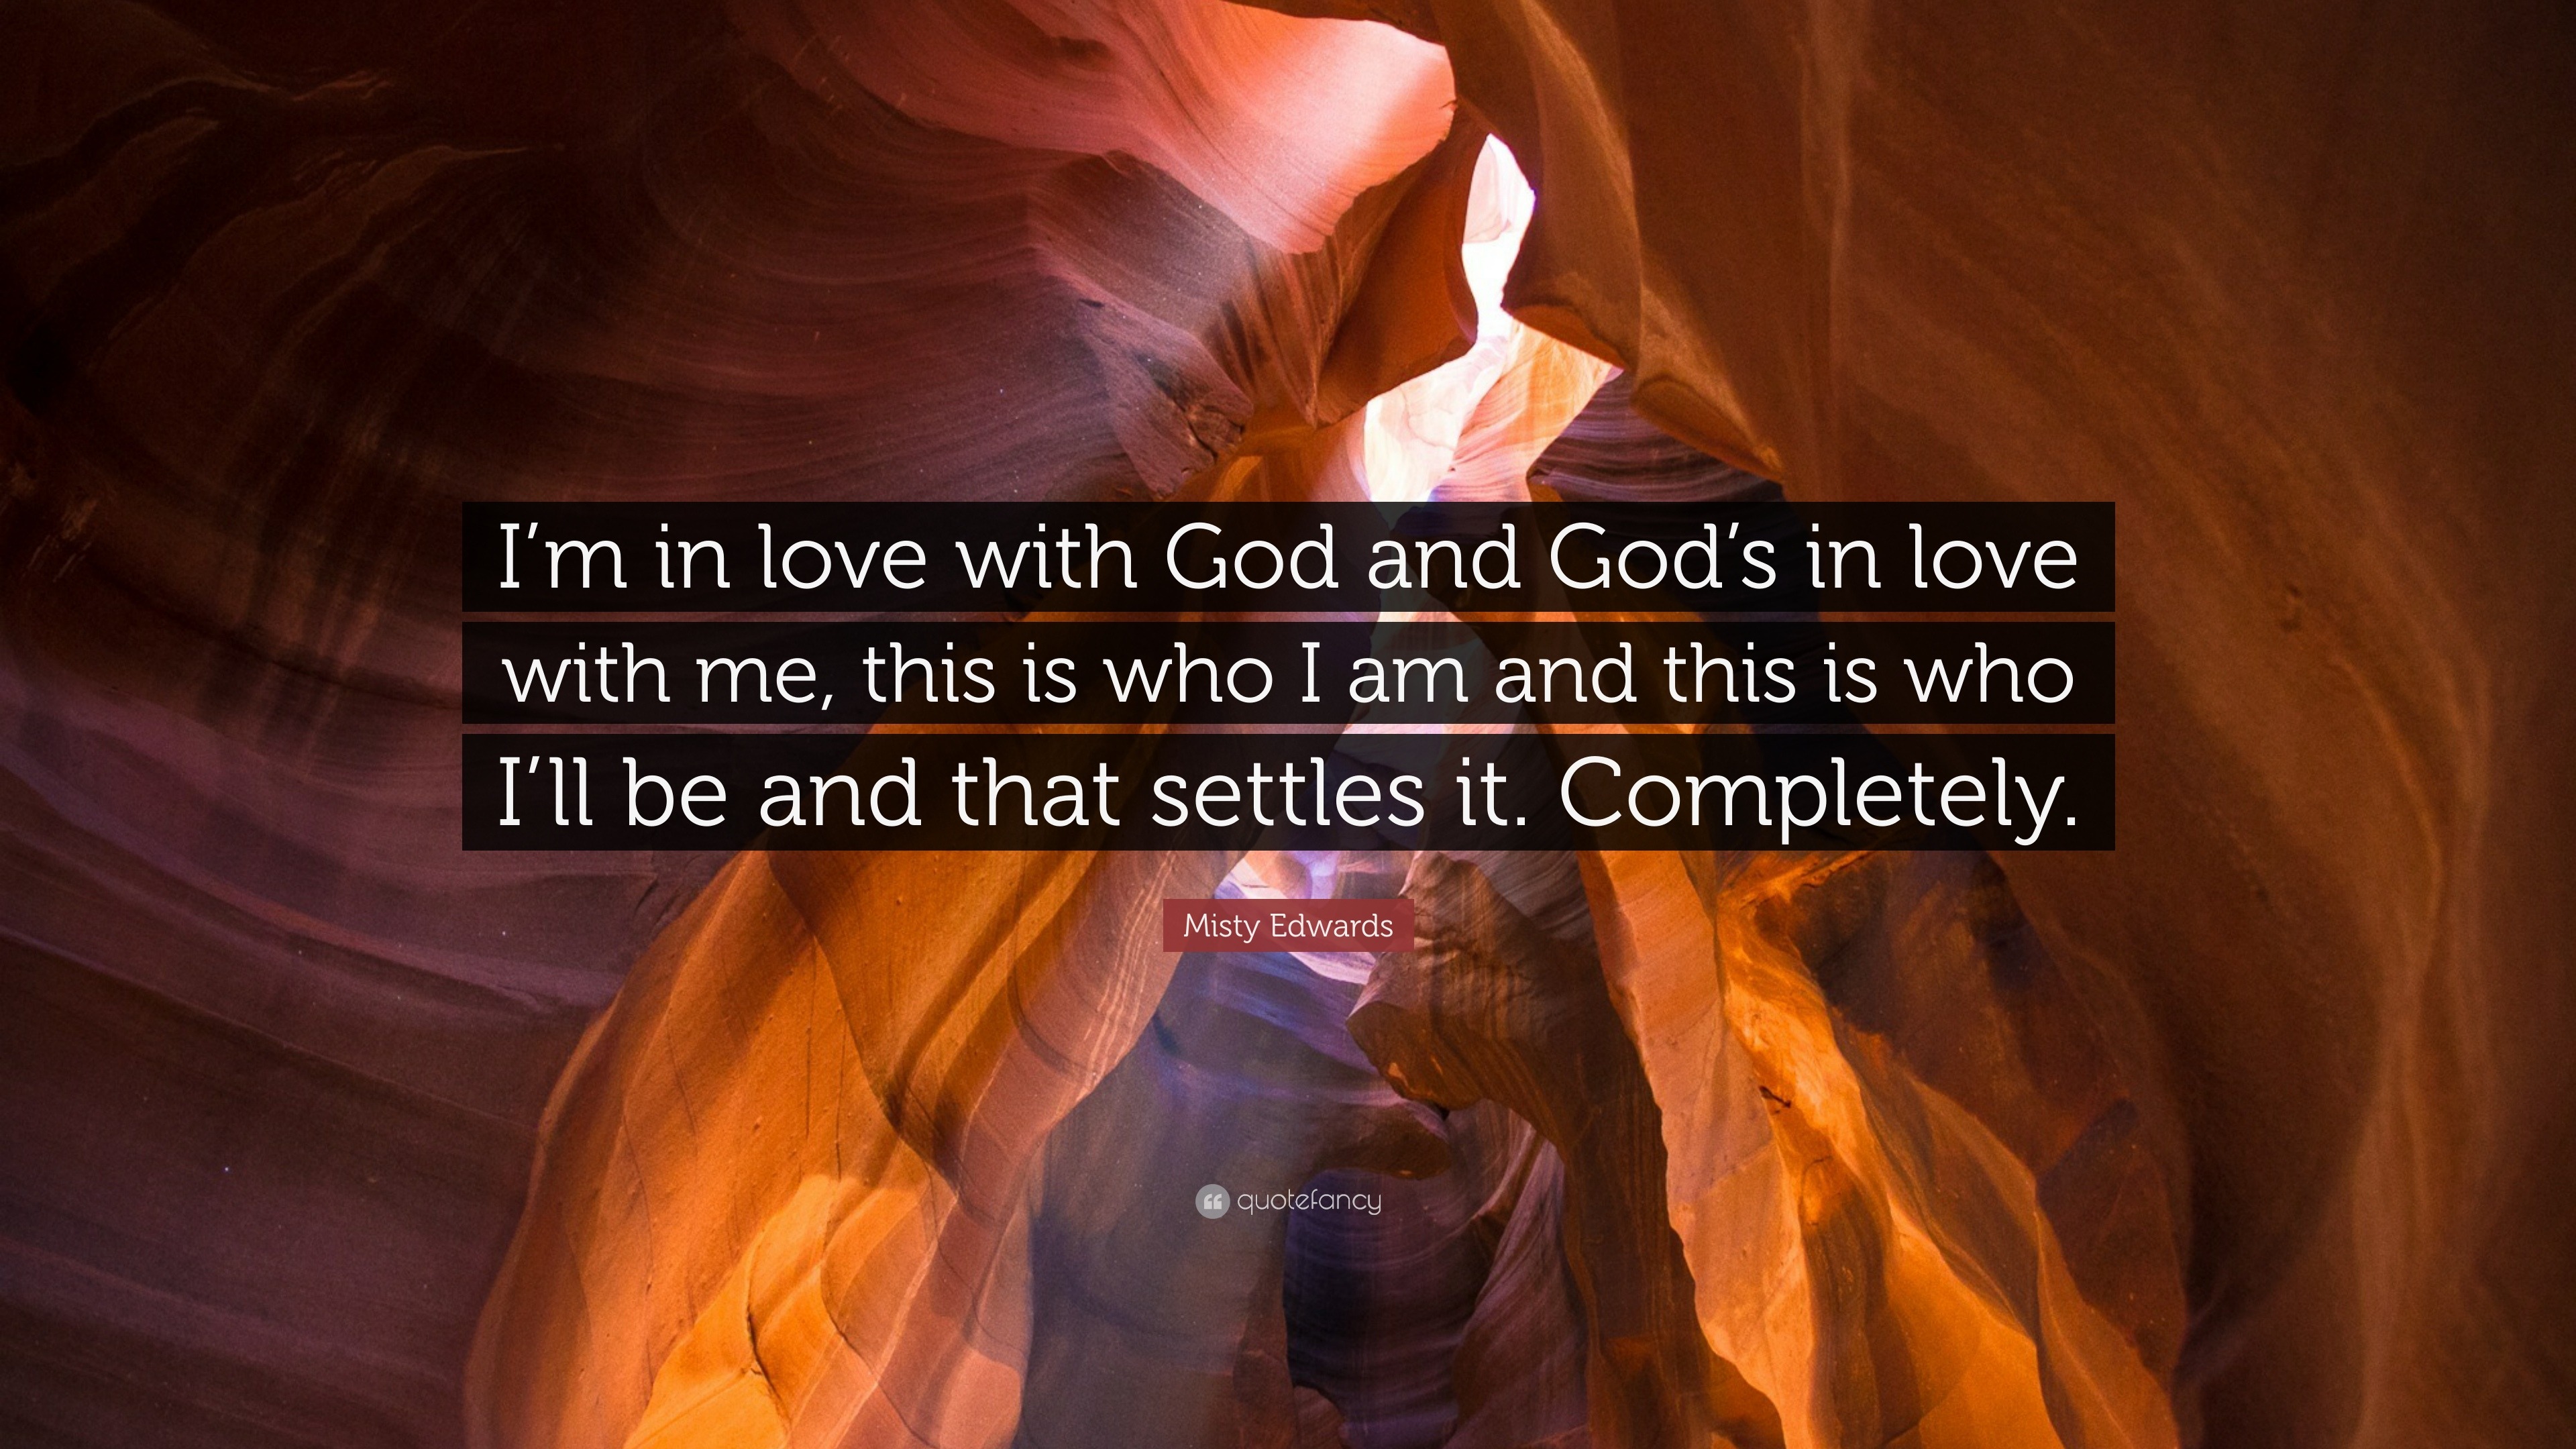 Misty Edwards Quote: “I'm in love with God and God's in love with